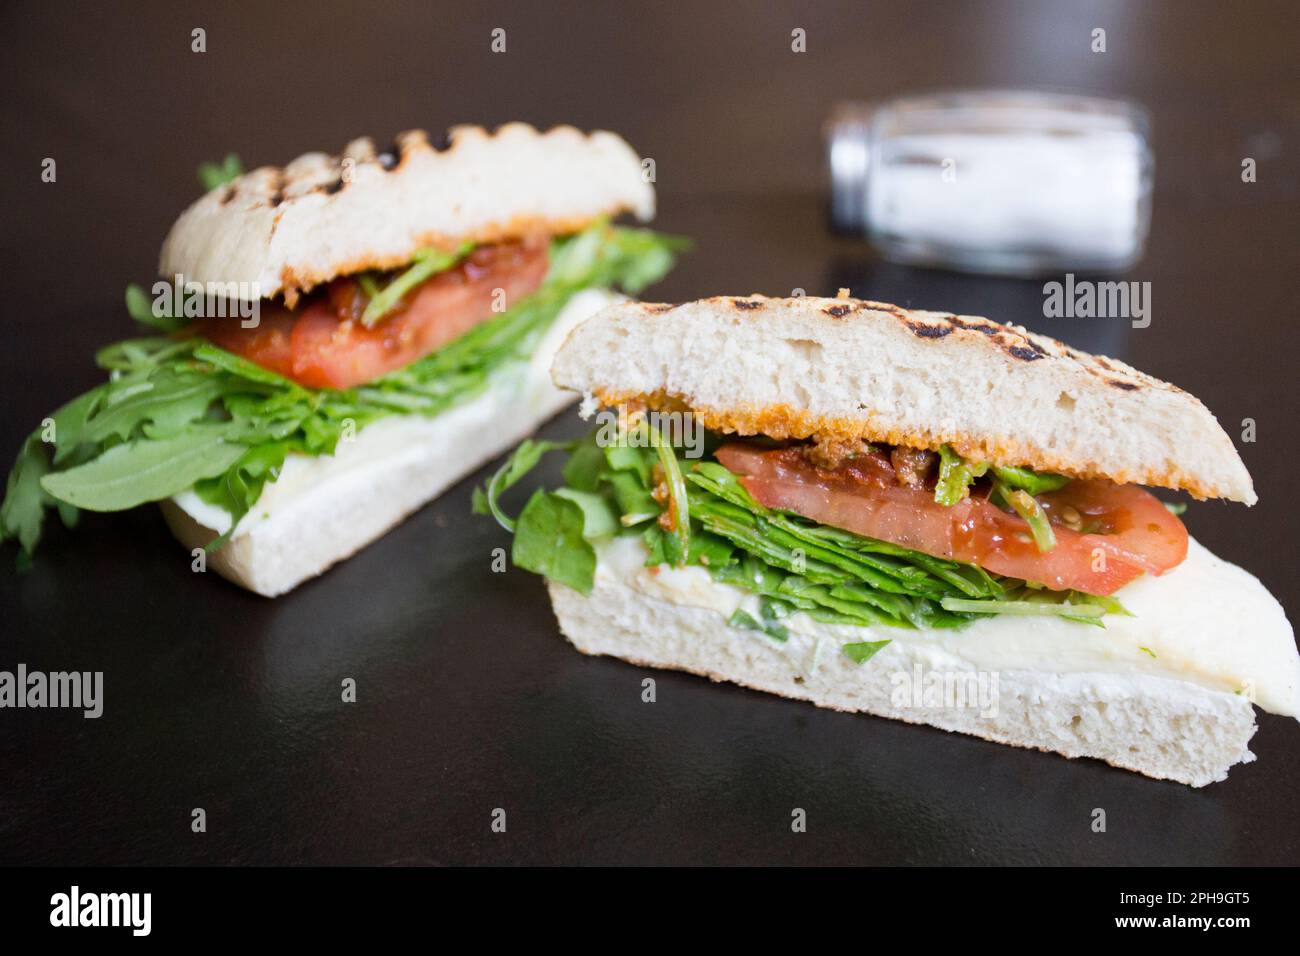 Delicious vegan sandwich with different vegetables. Stock Photo